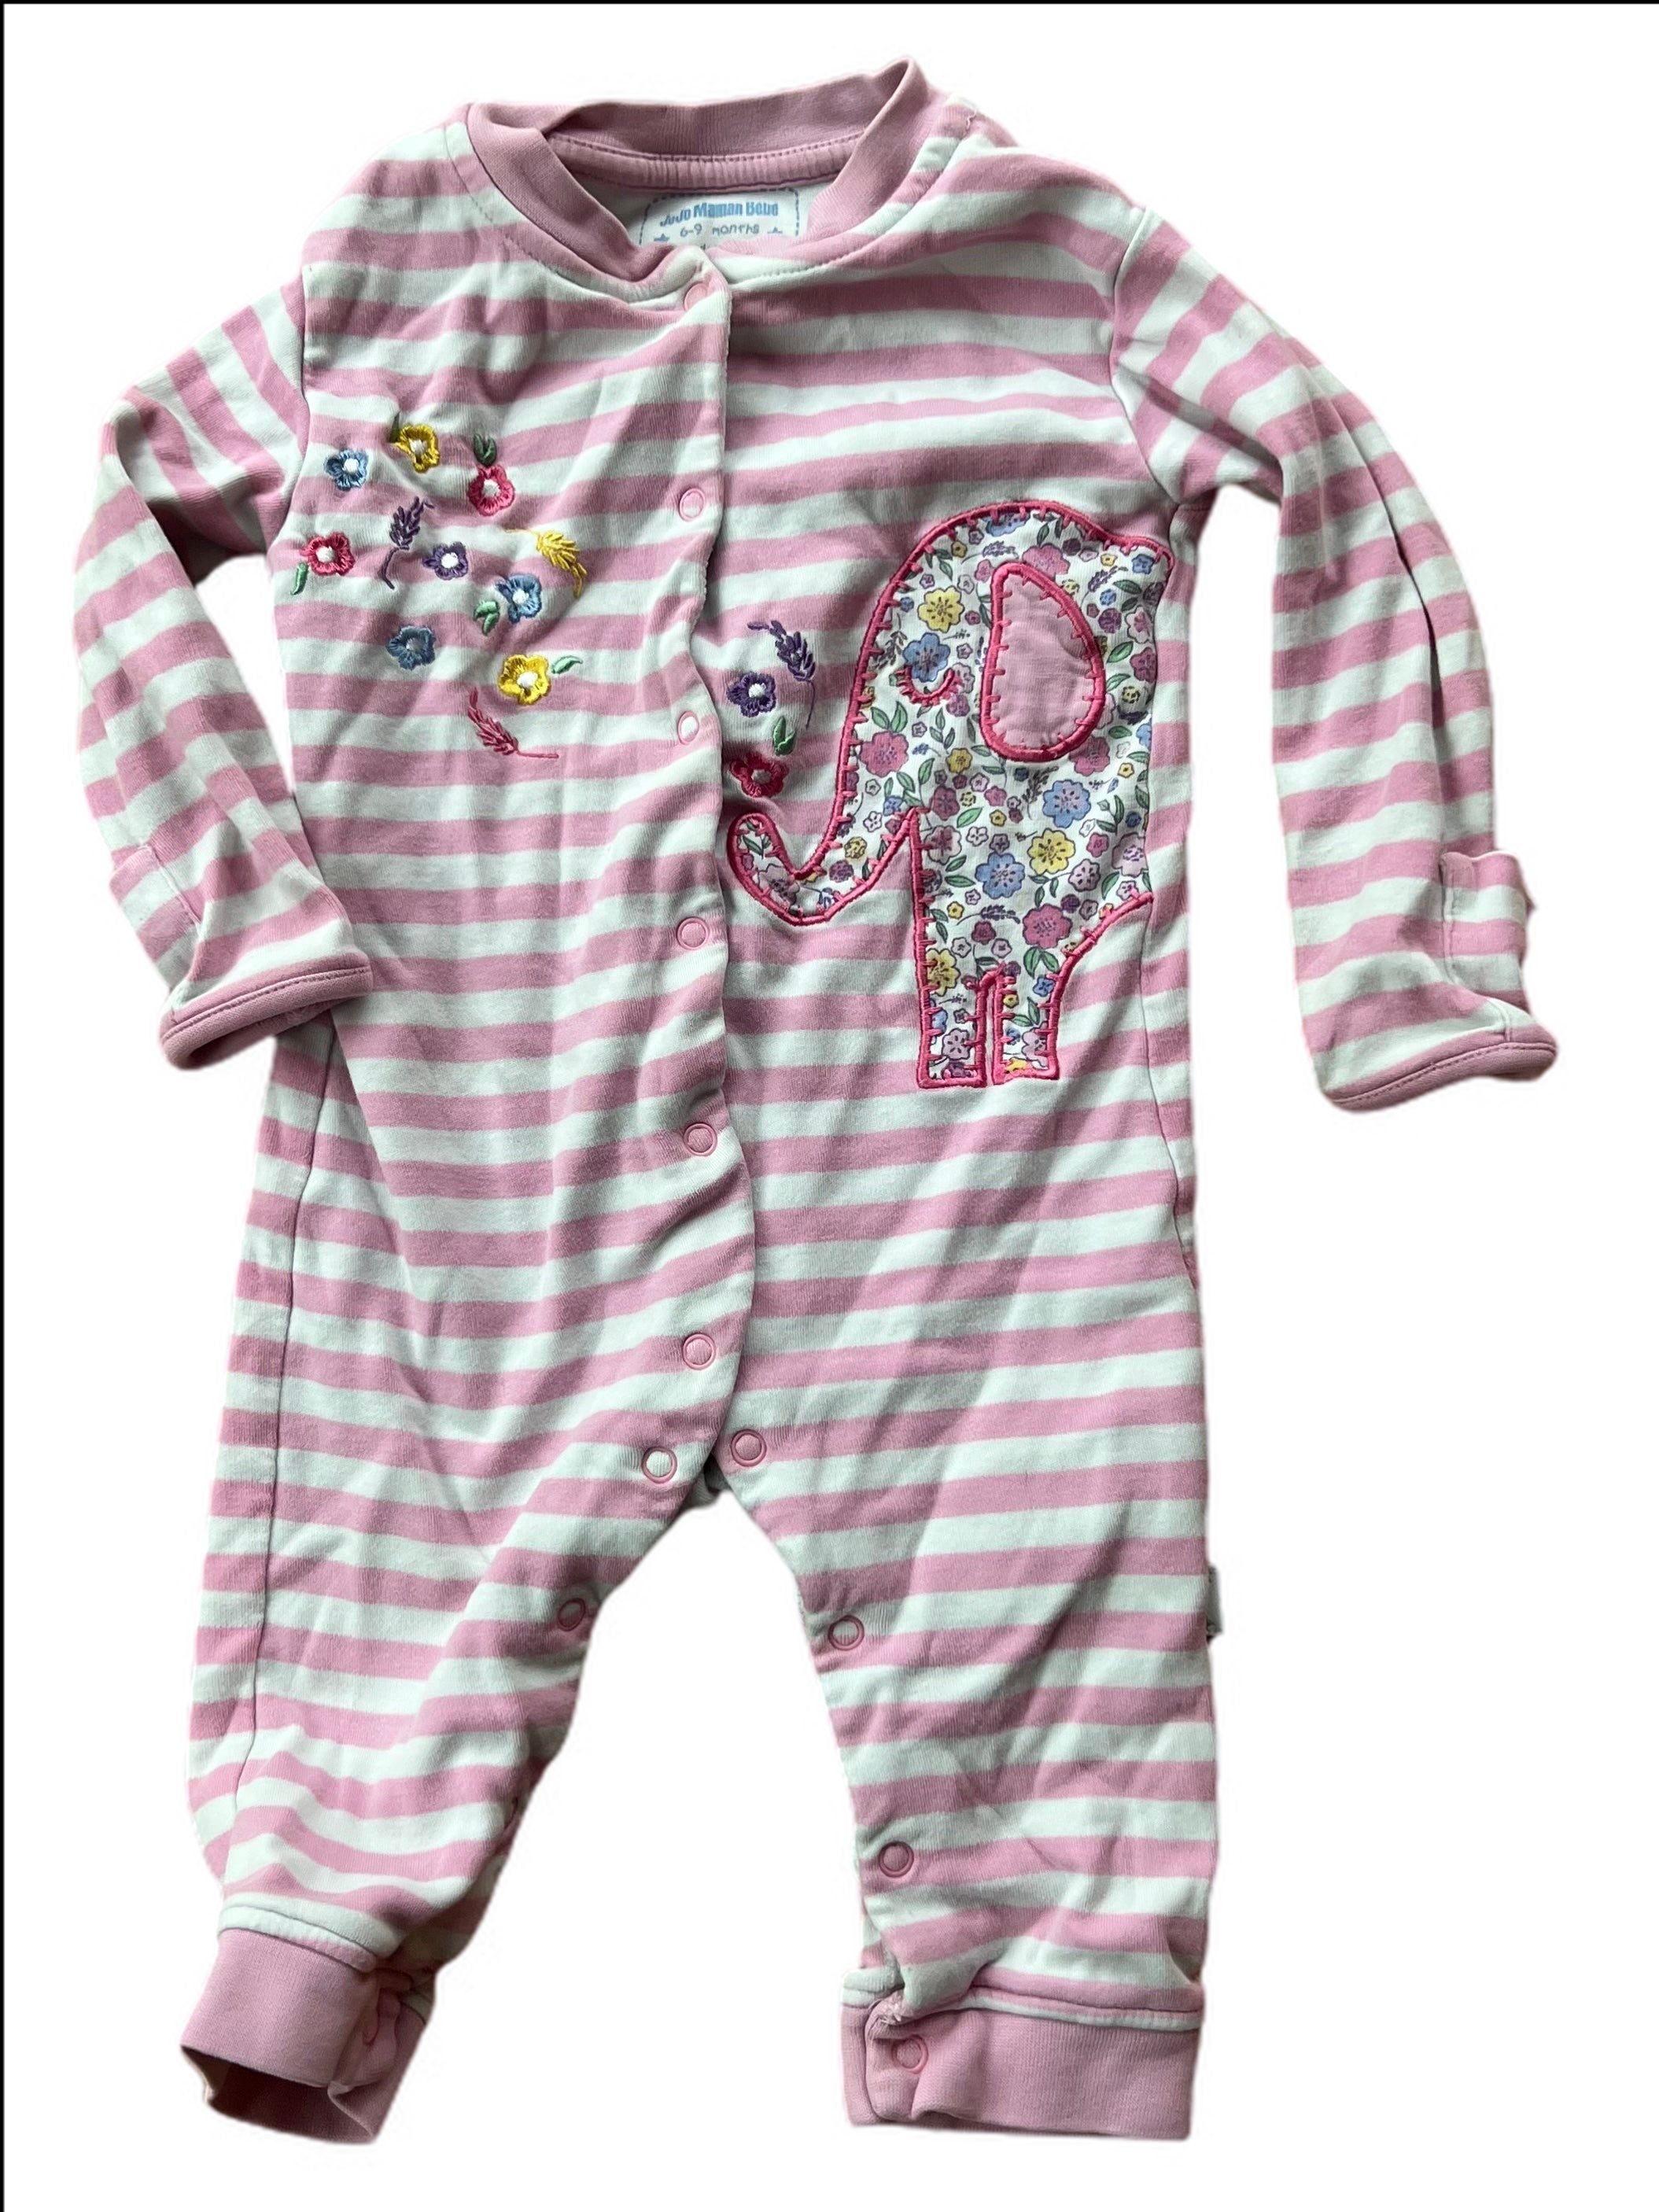 Striped Footless Baby Grow with Floral Elephant Applique tiny hole